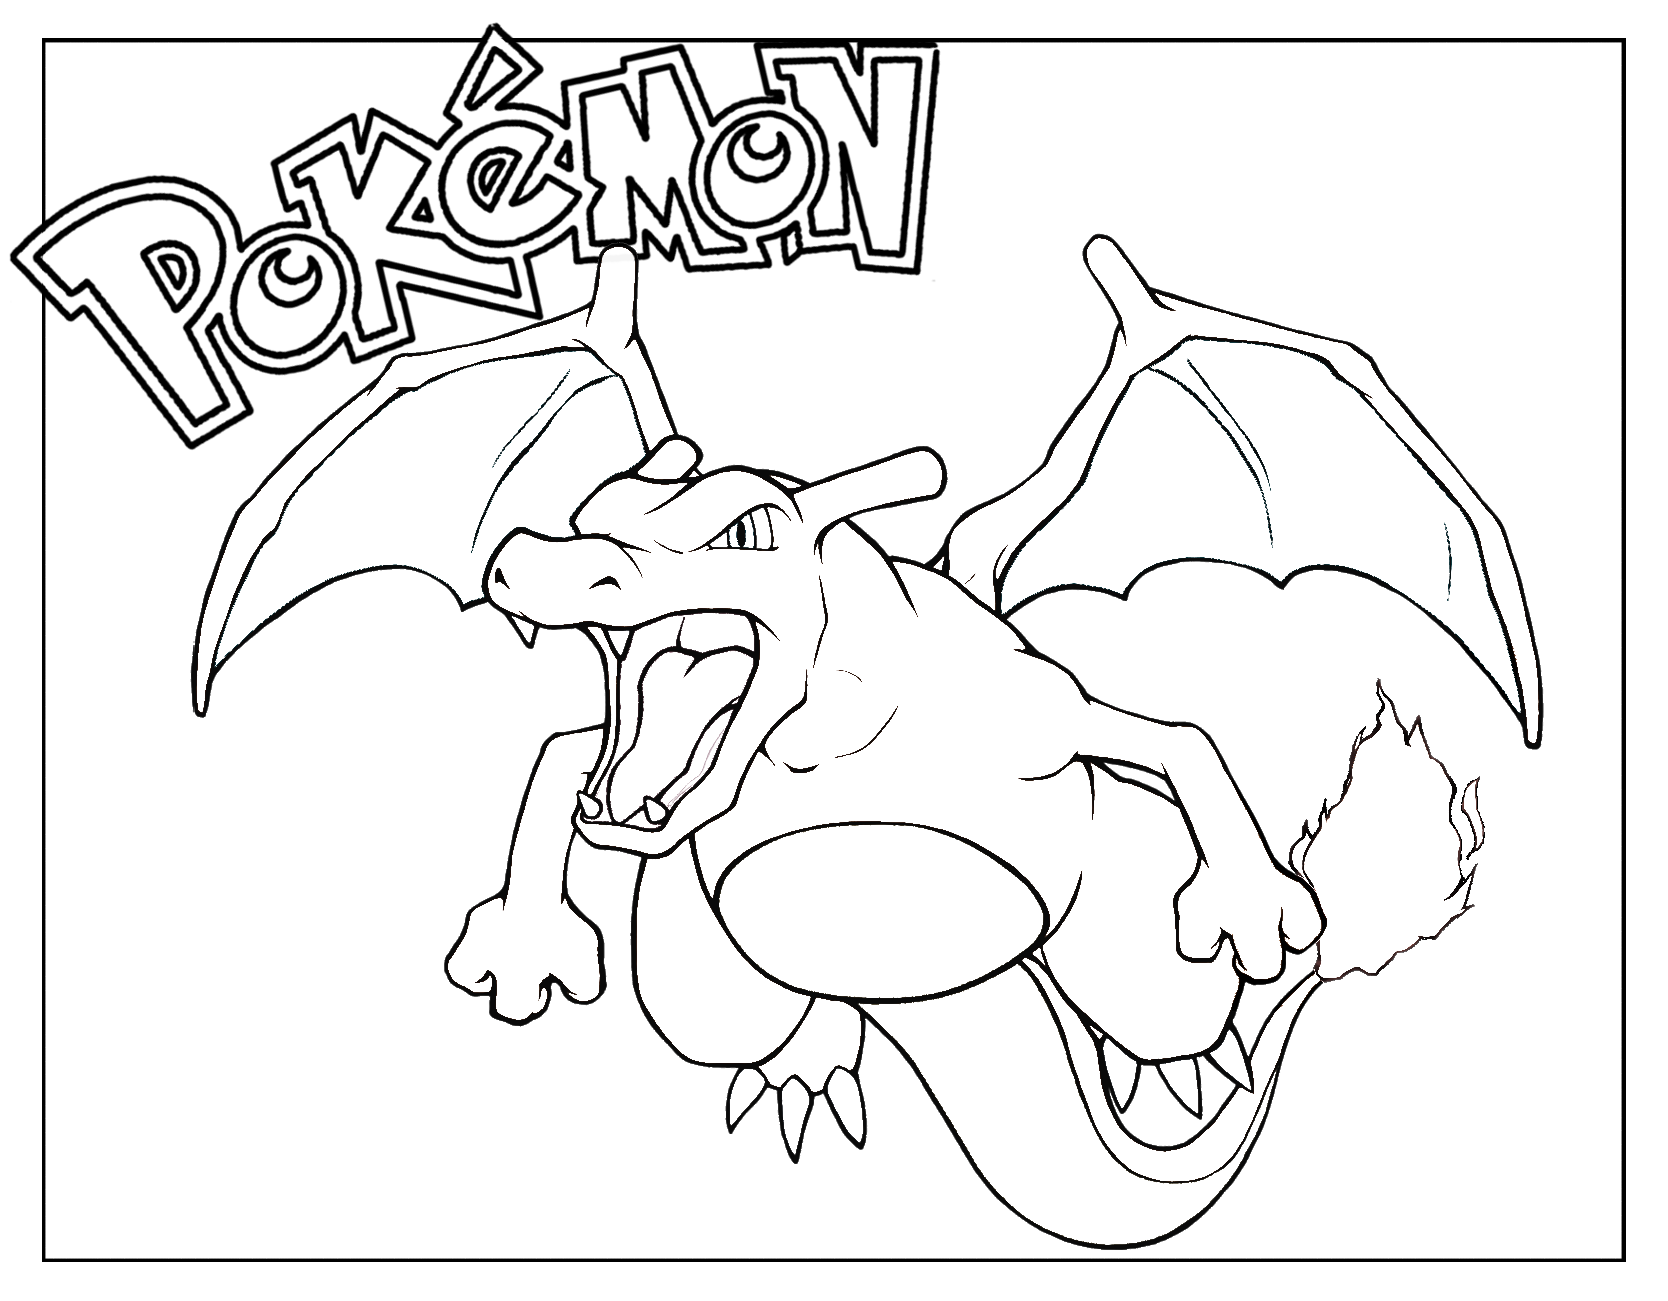 Printable Charizard Coloring Pages - Charizard Gx Coloring Pages